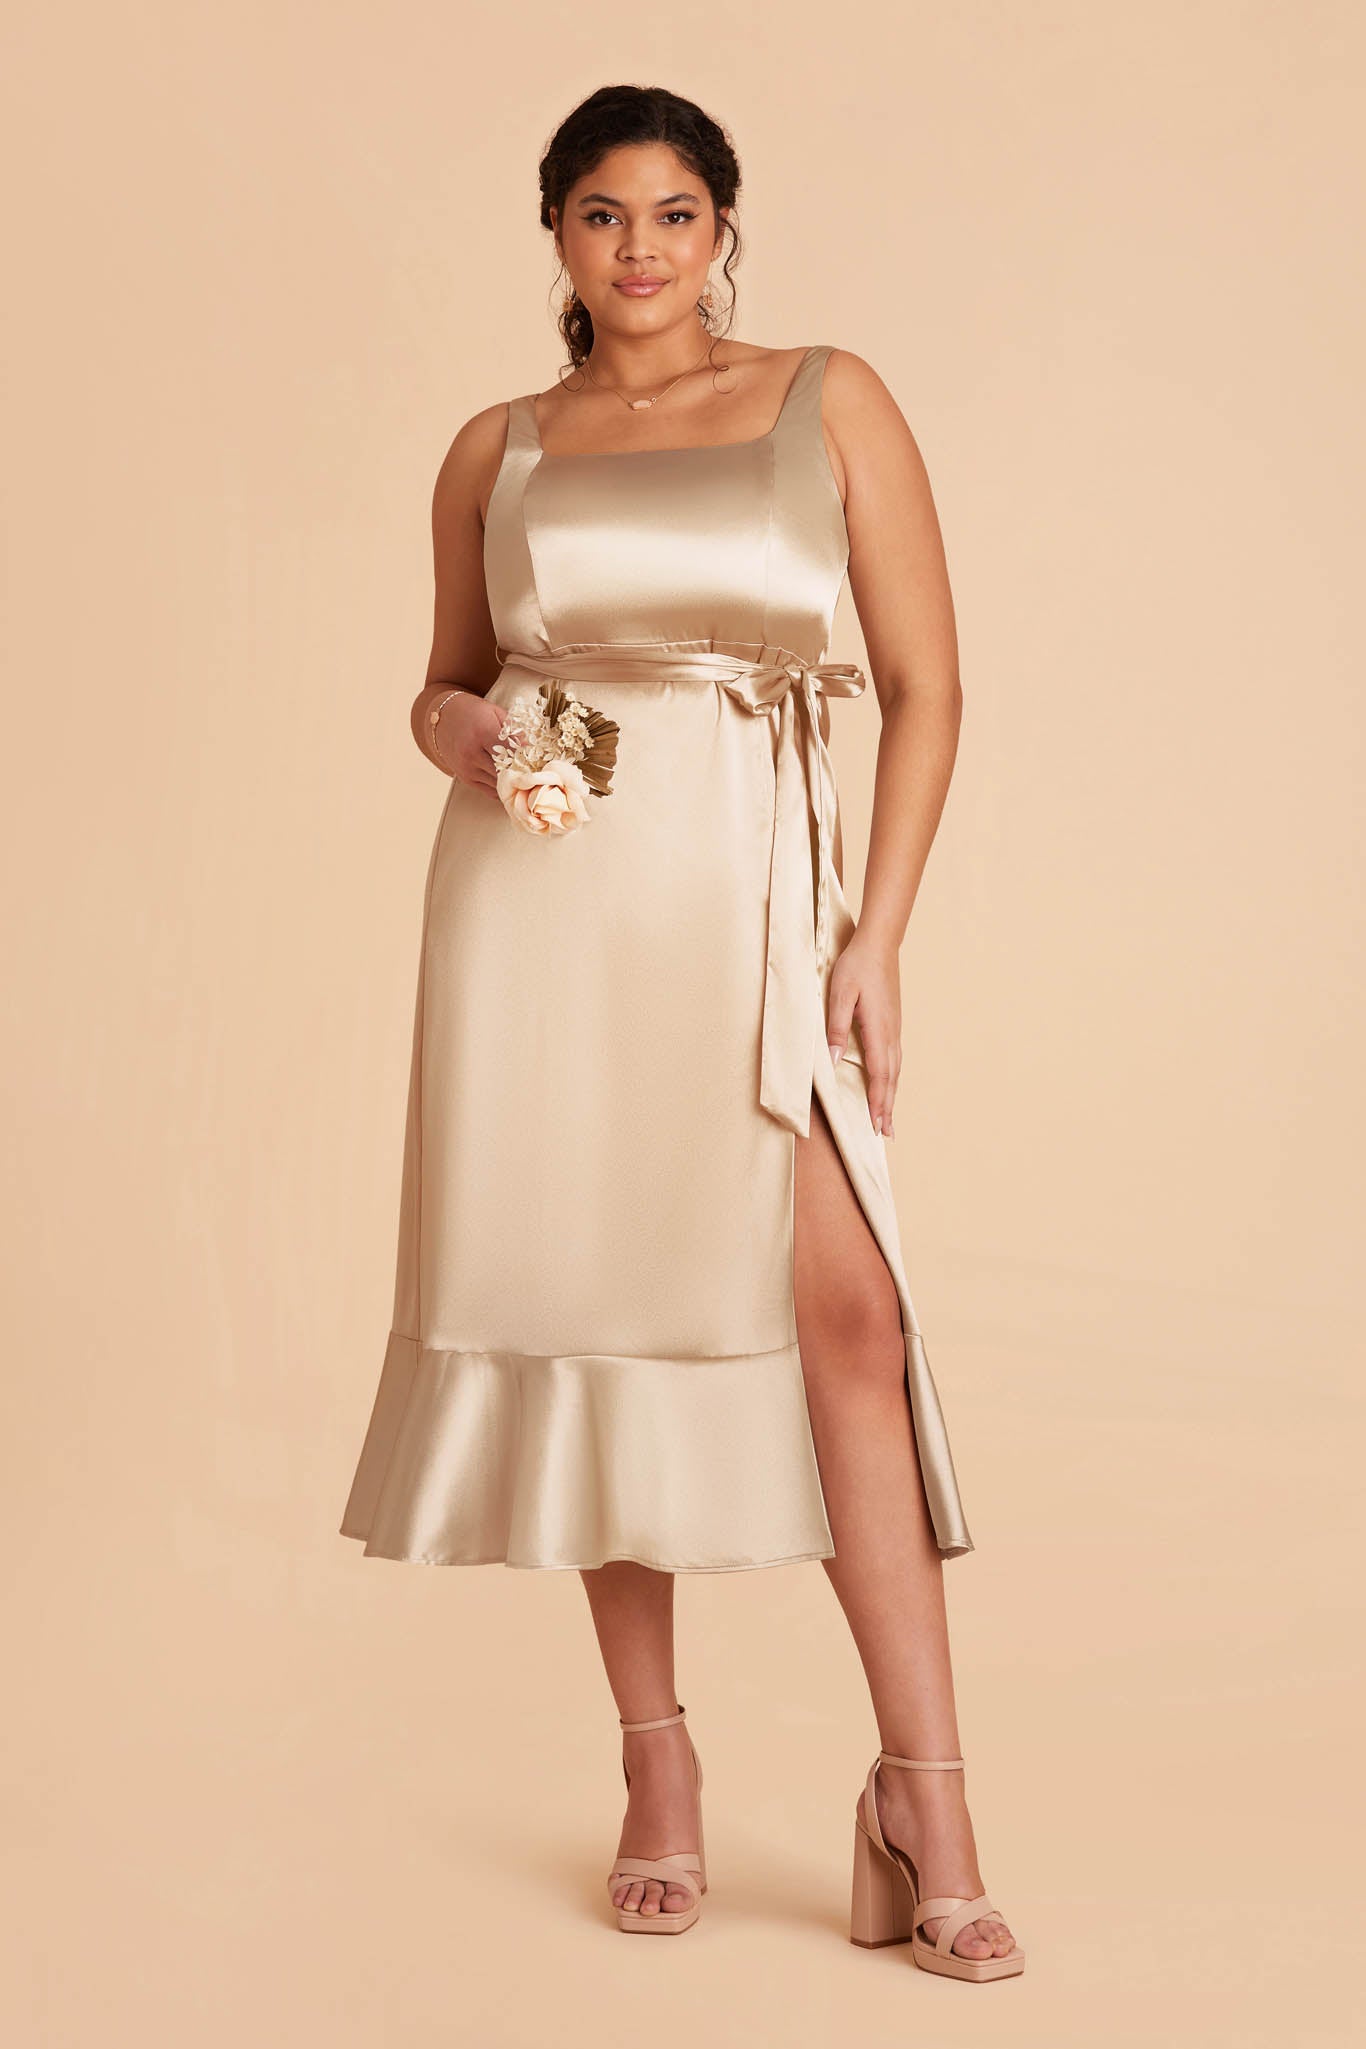 Neutral Champagne Eugenia Convertible Midi Dress by Birdy Grey